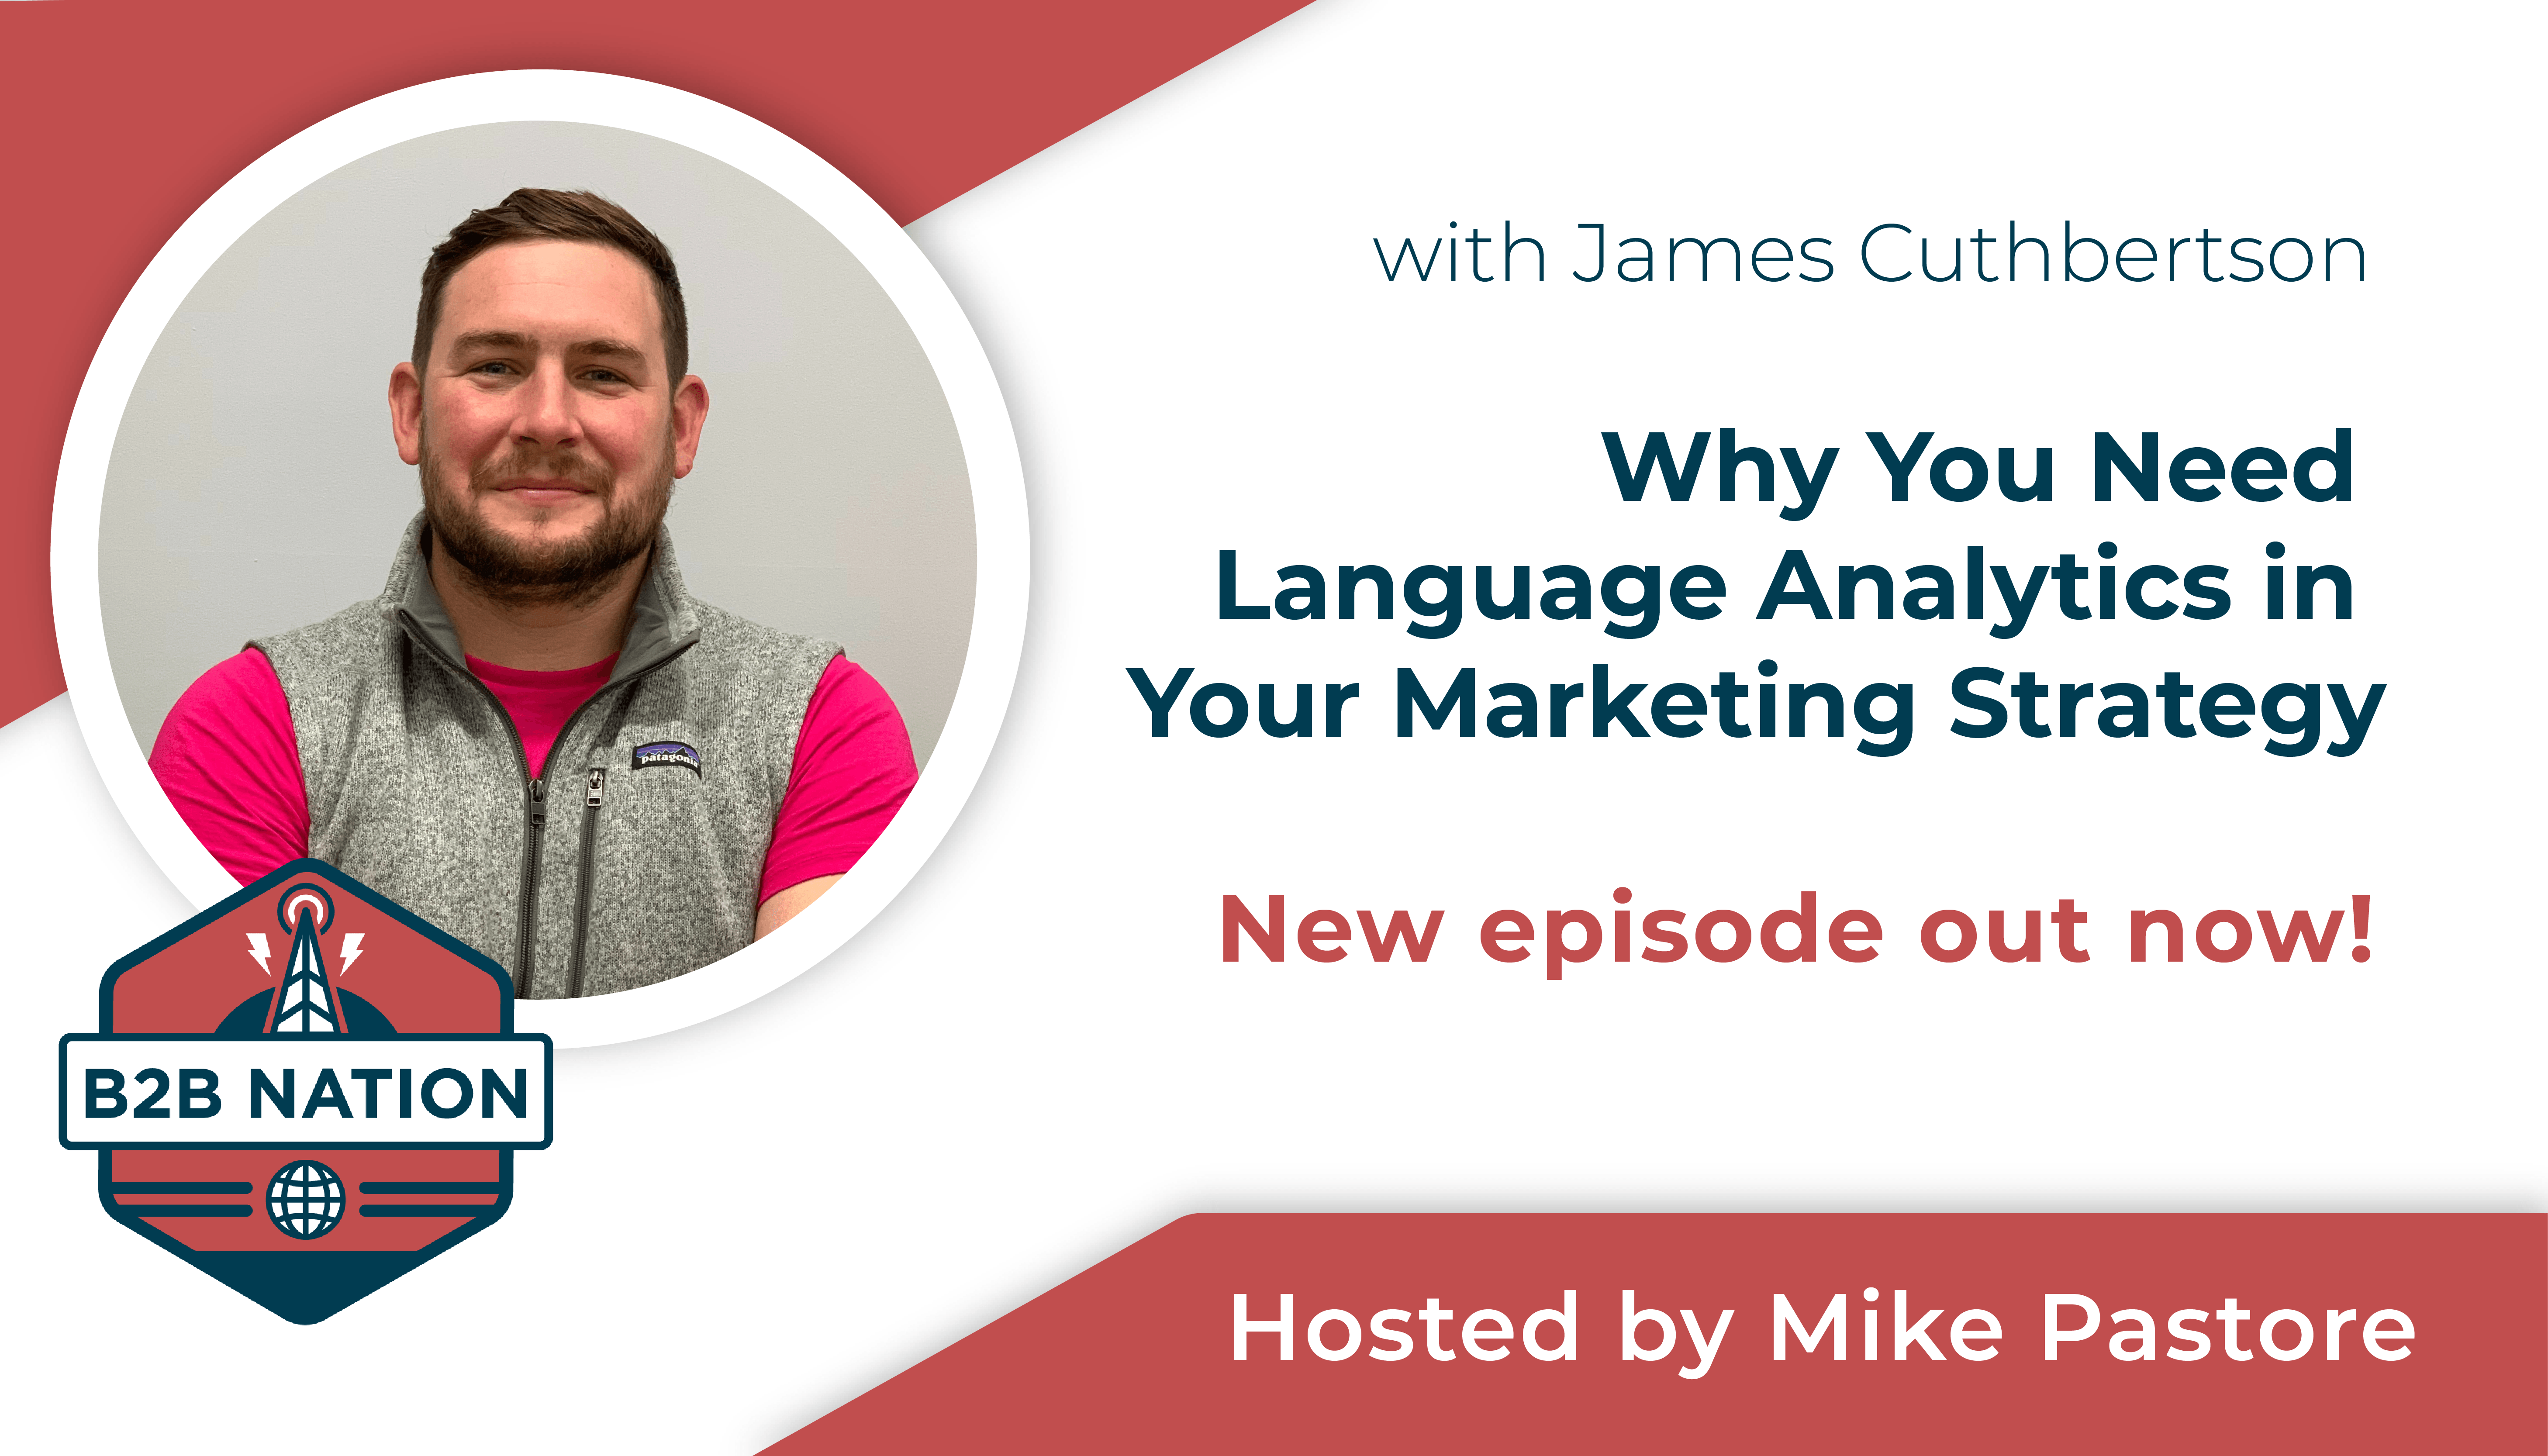 Do you need language analytics in your marketing strategy?